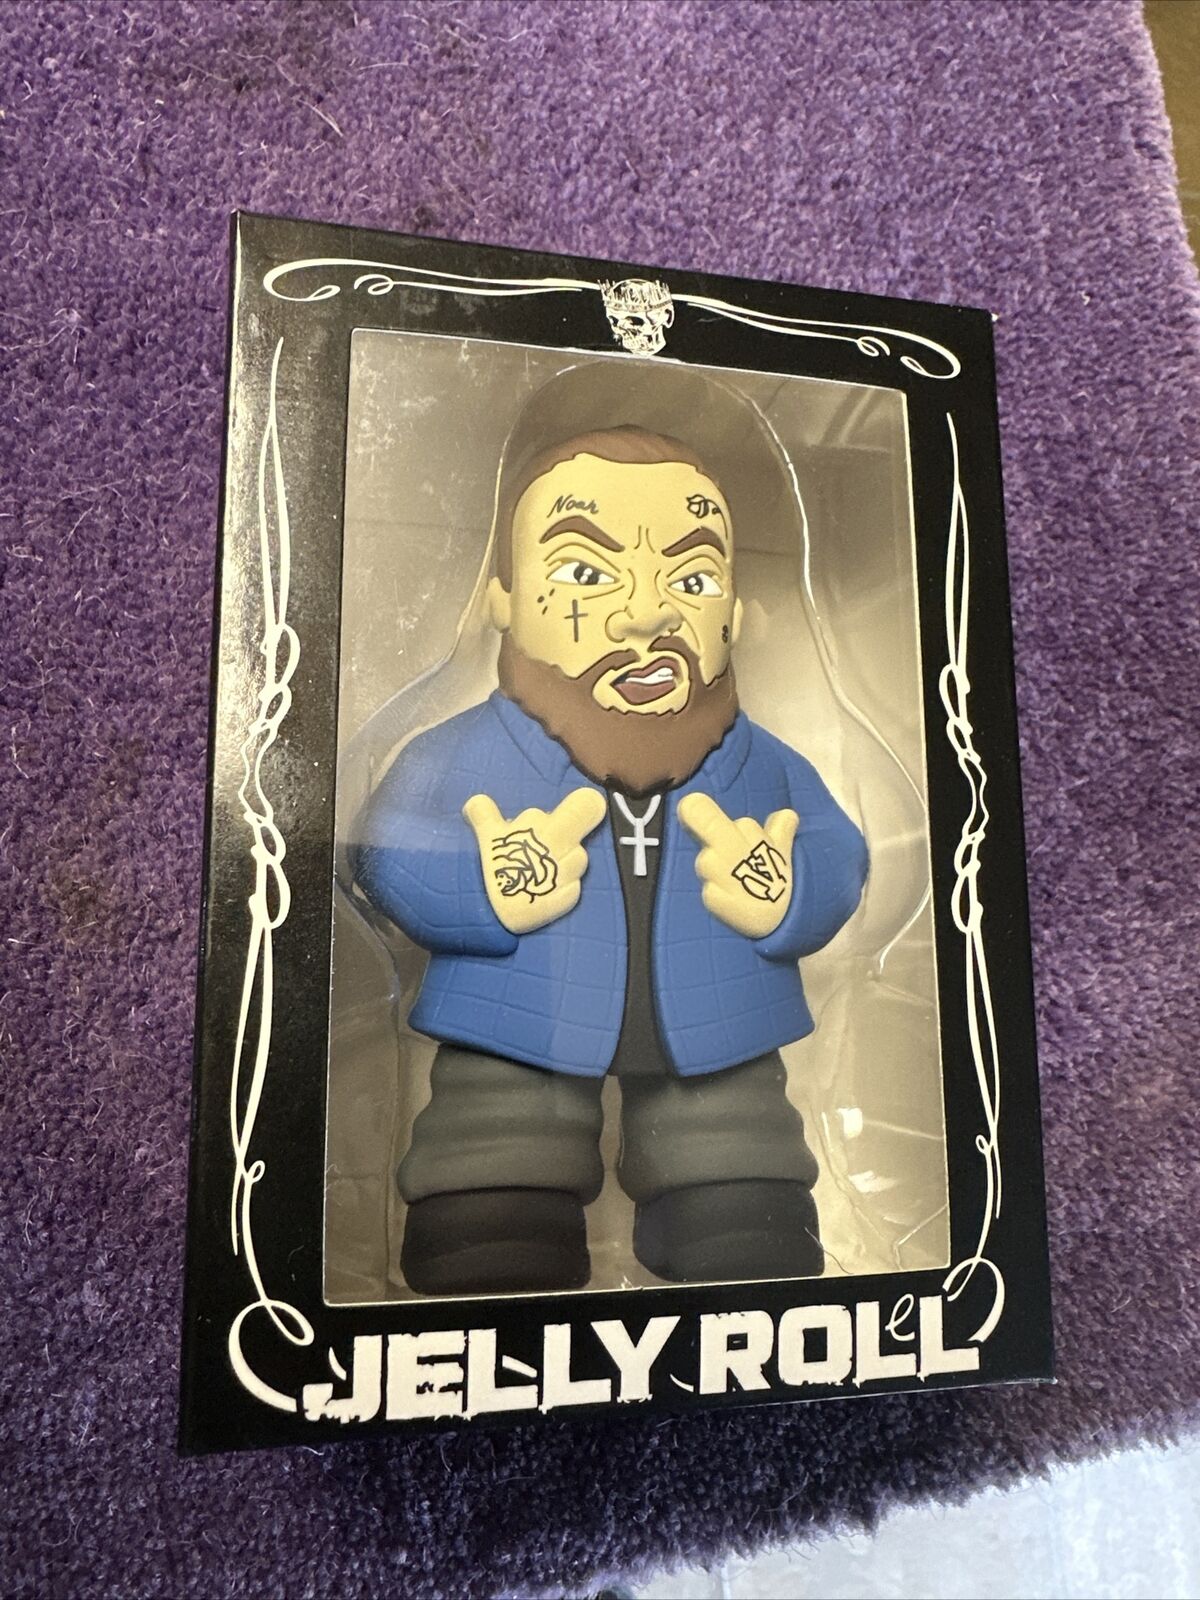 Jelly Roll 4” Figure Figurine Knuckleheadztoys Collaboration Extremely Rare Blue